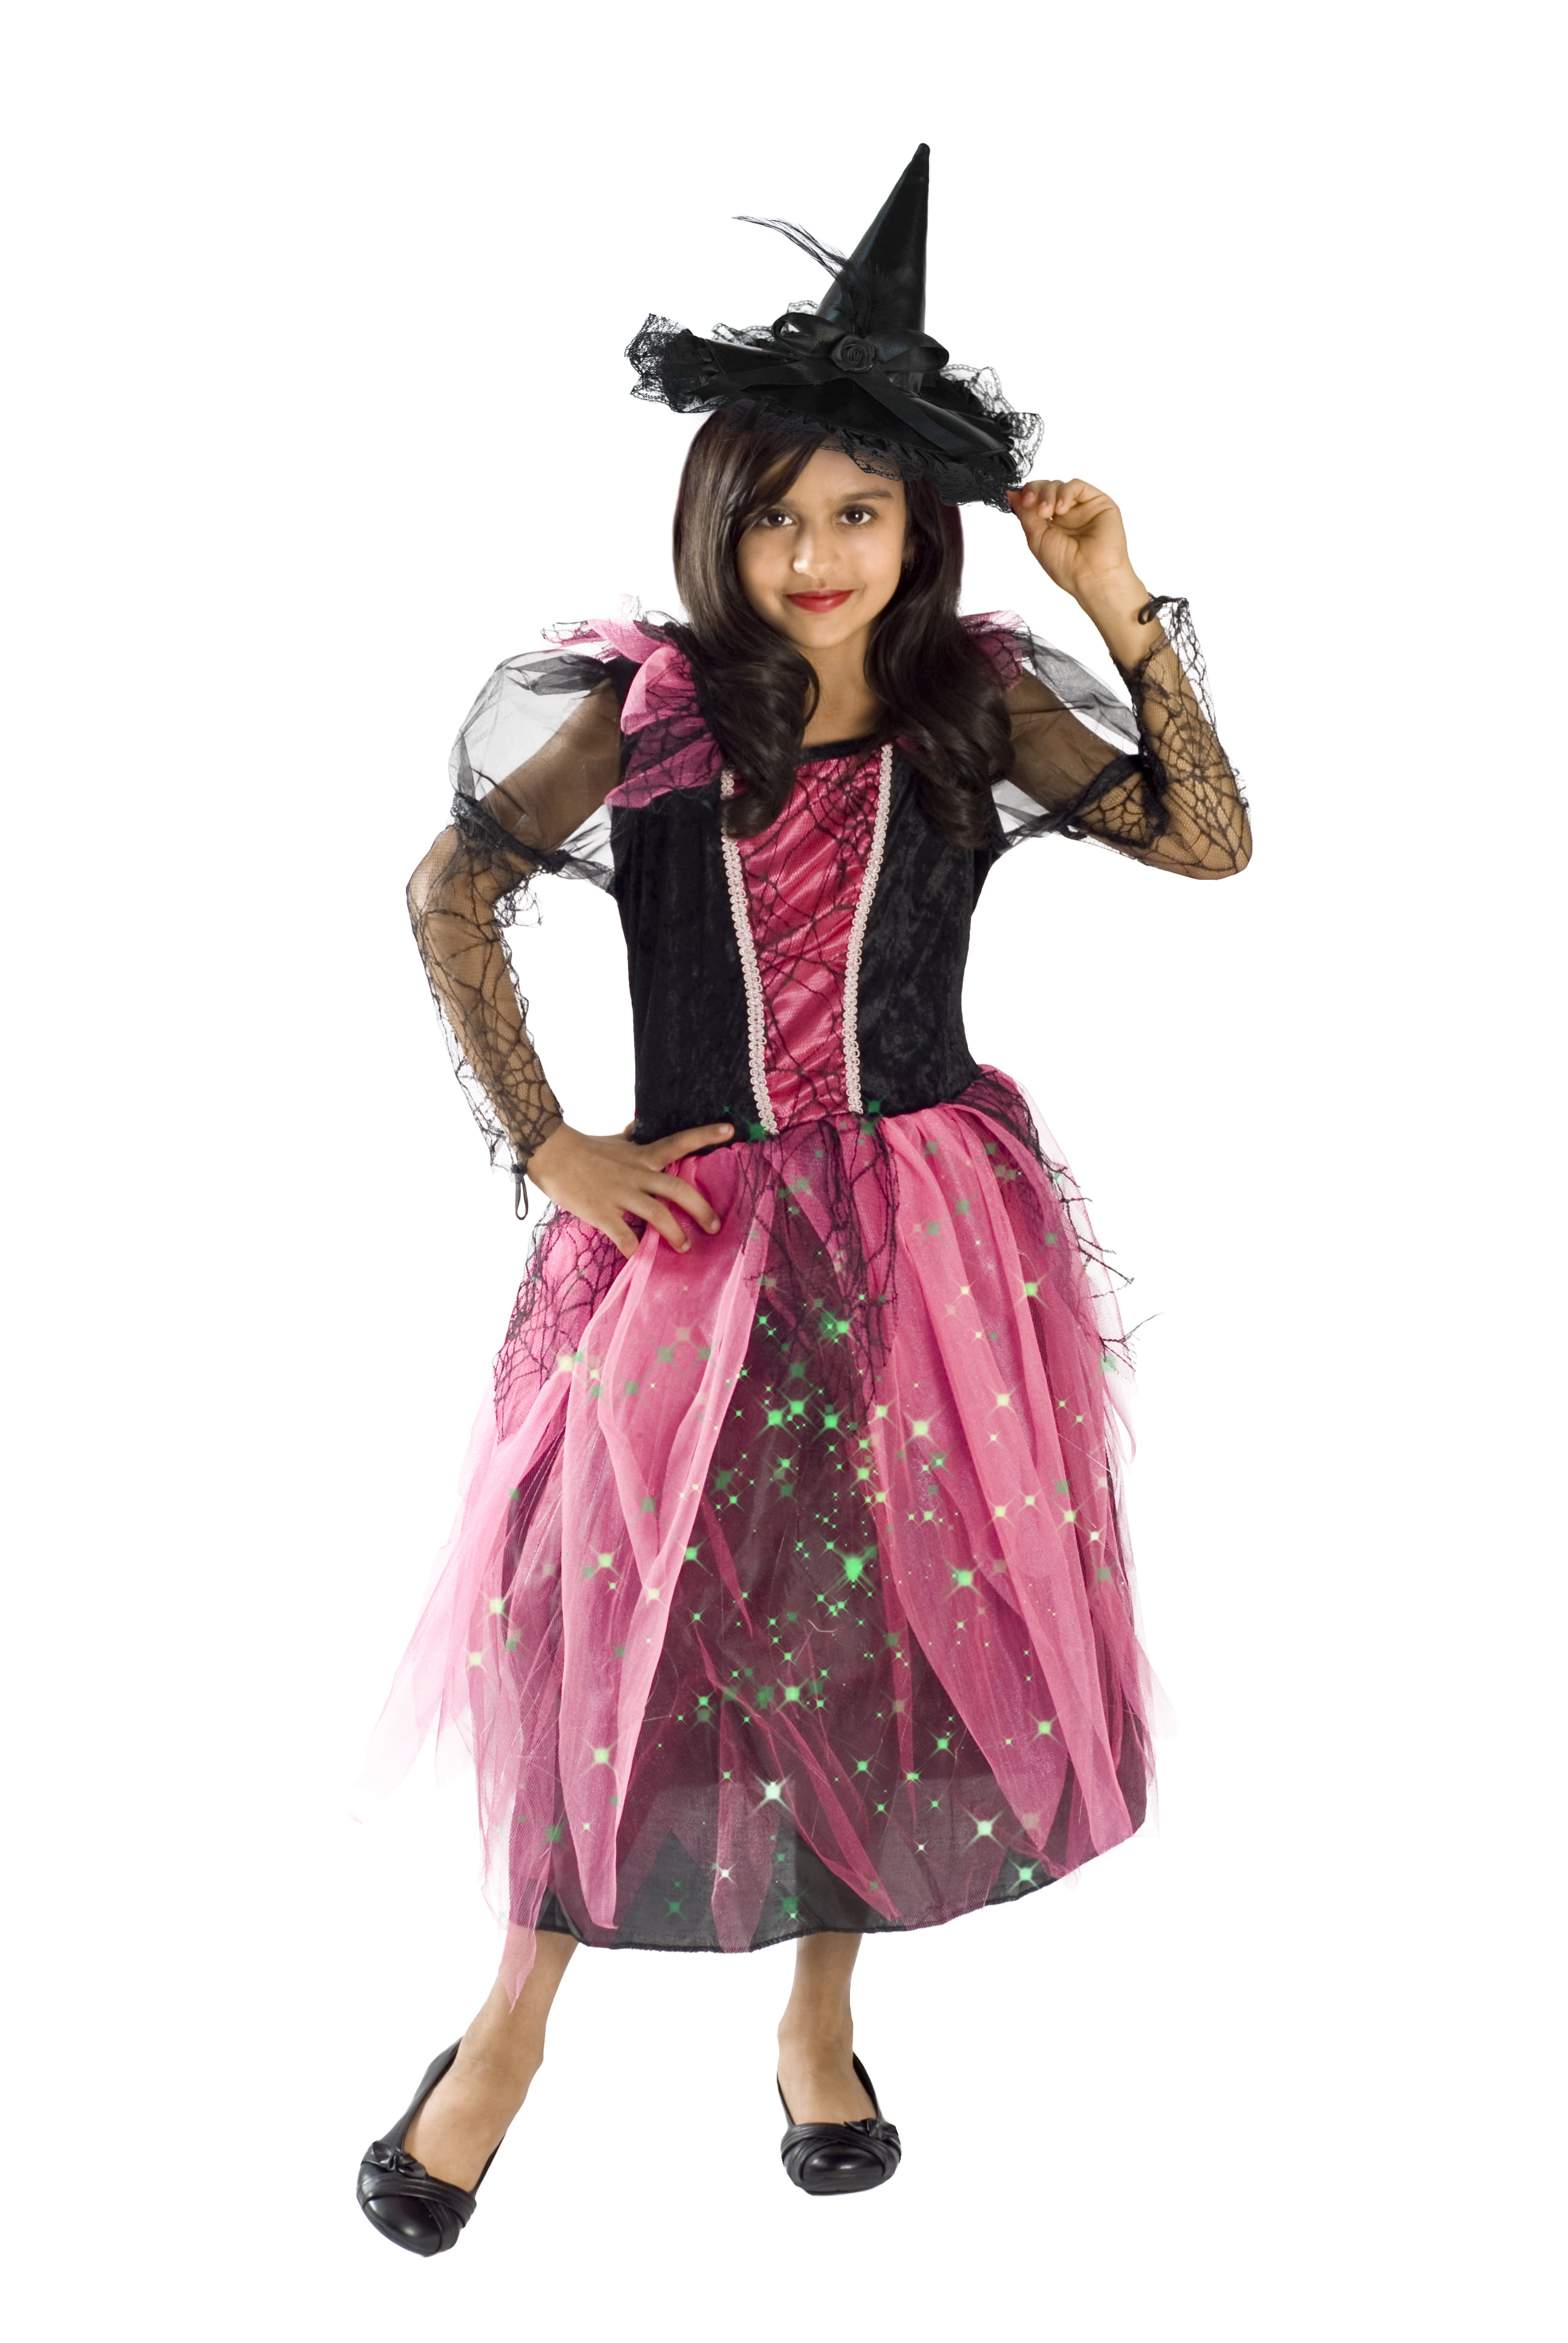 BUBBLE GUM PINK WITCH w/ Hat Size XS SM MED Child Halloween Costume Fancy Dress 